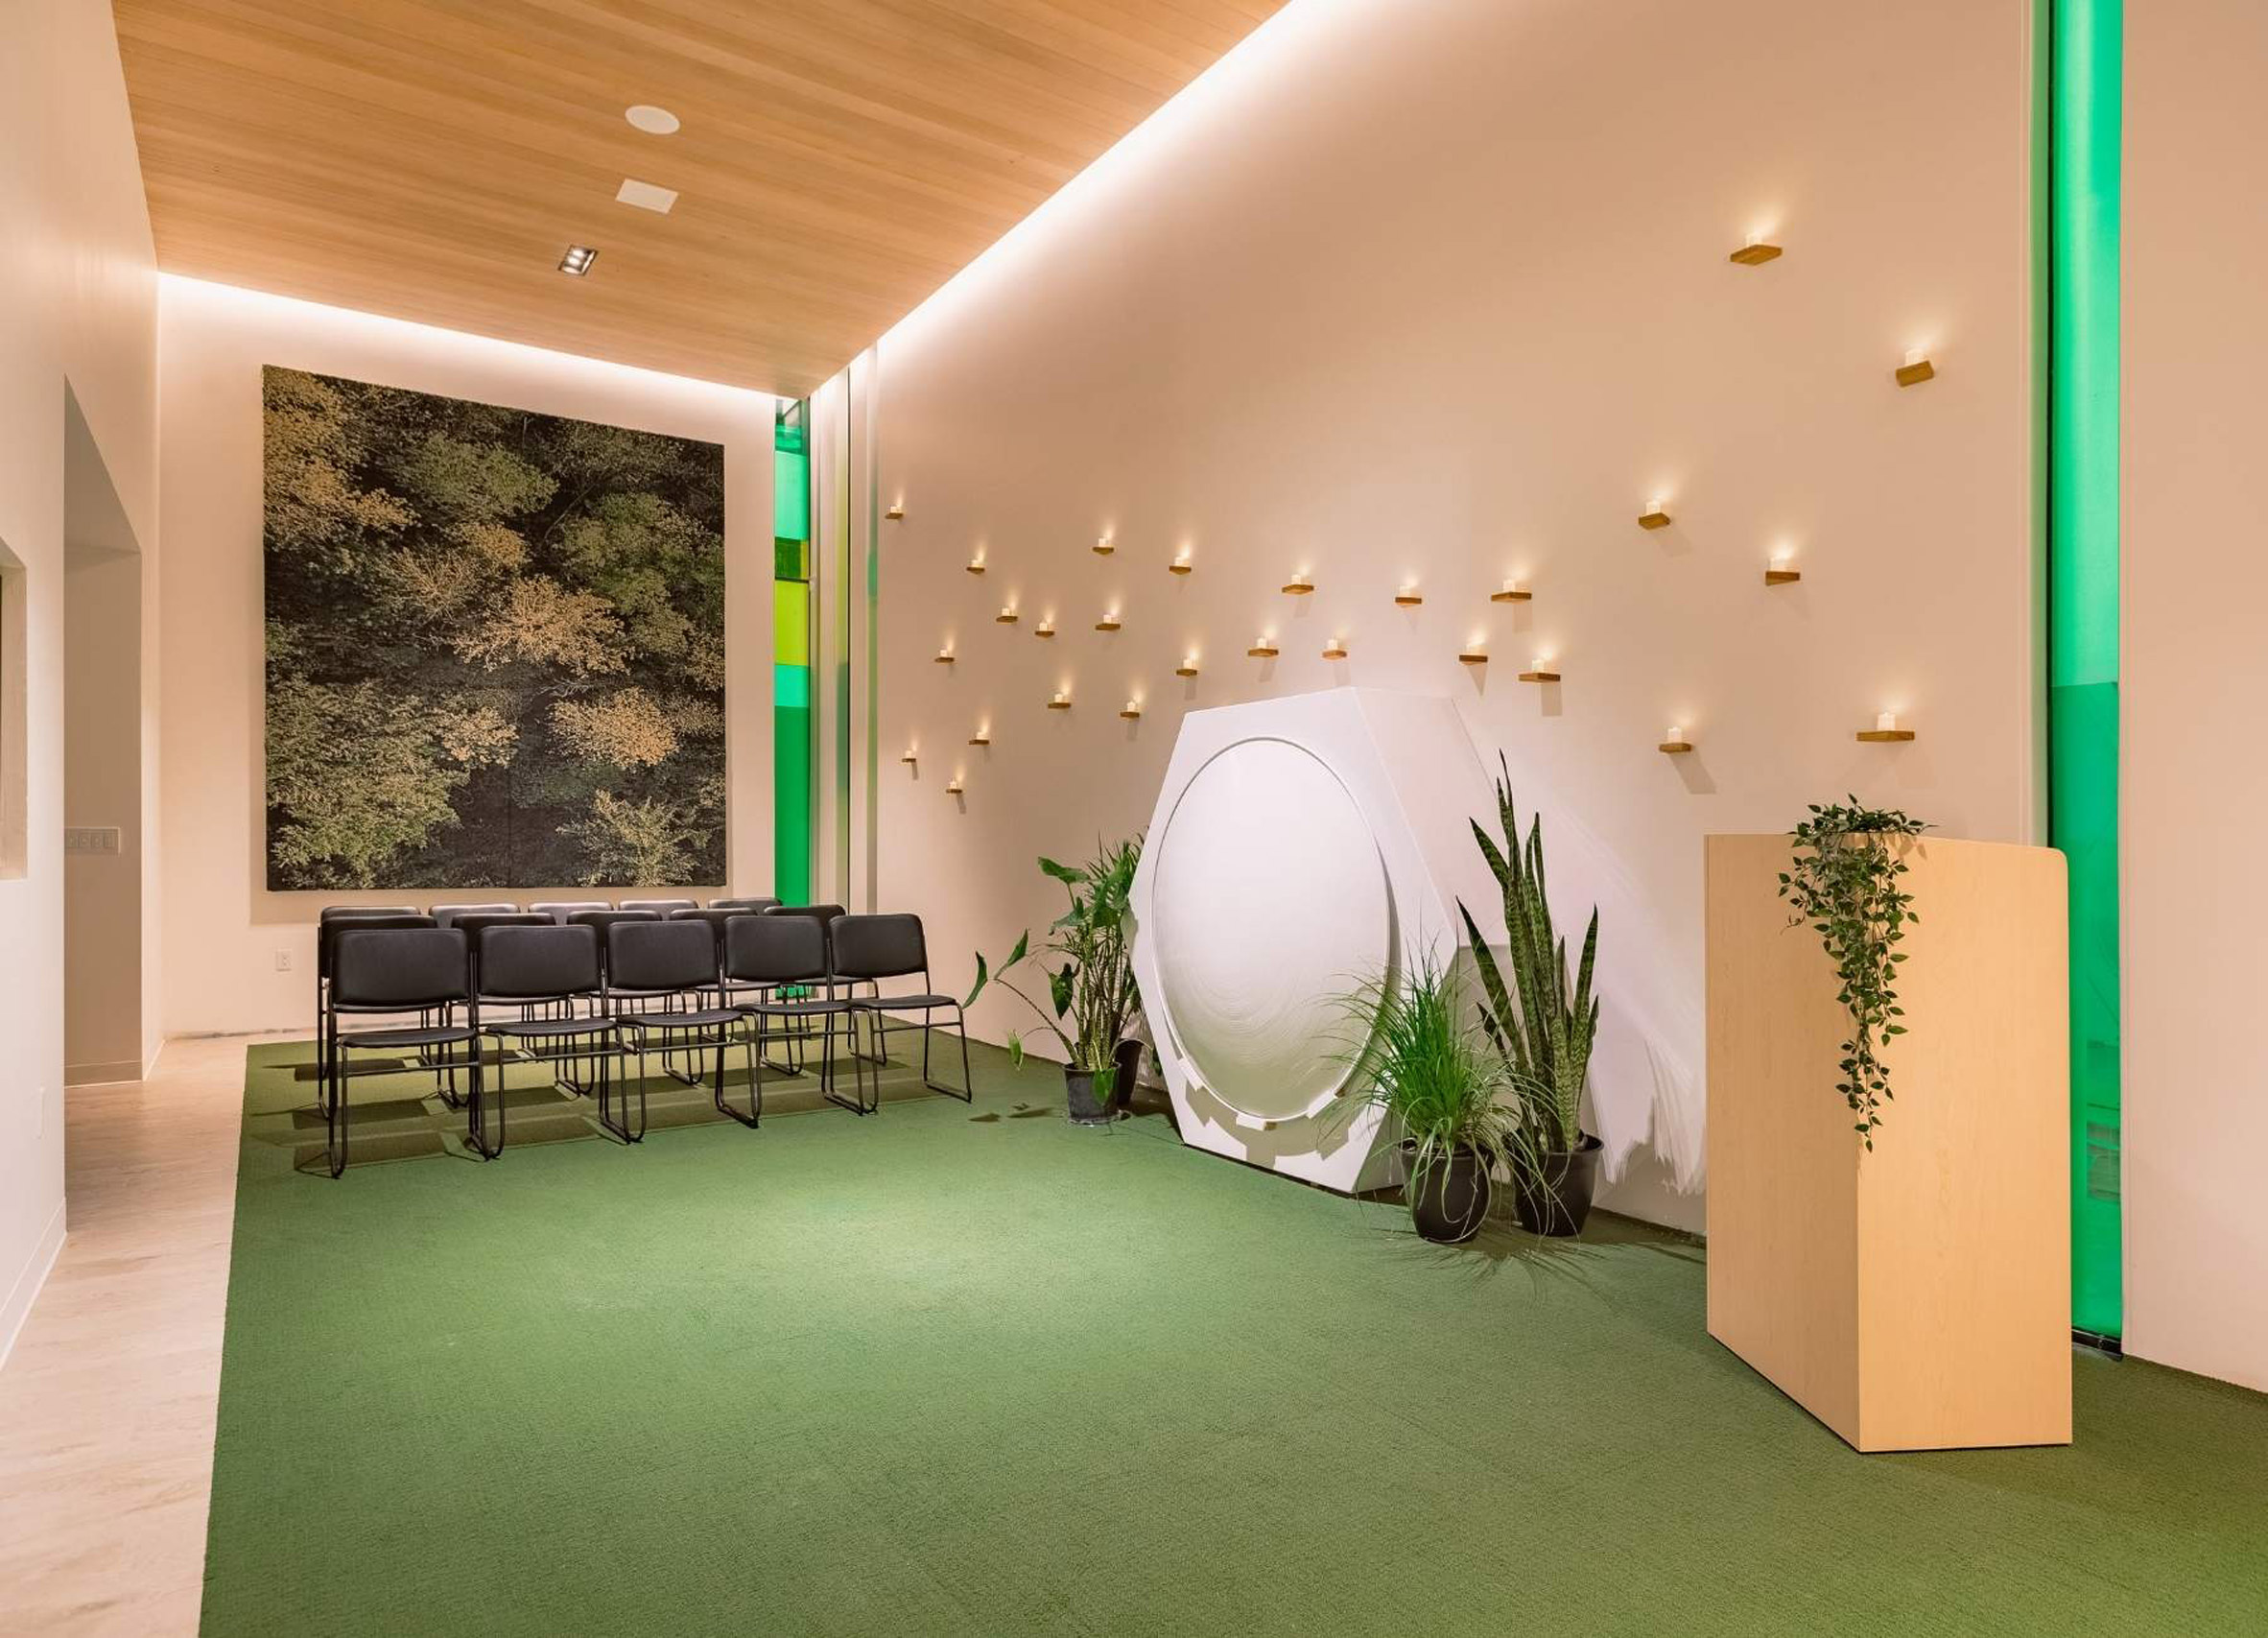 Ceremony room of human composting facility in Seattle designed by Olson Kundig